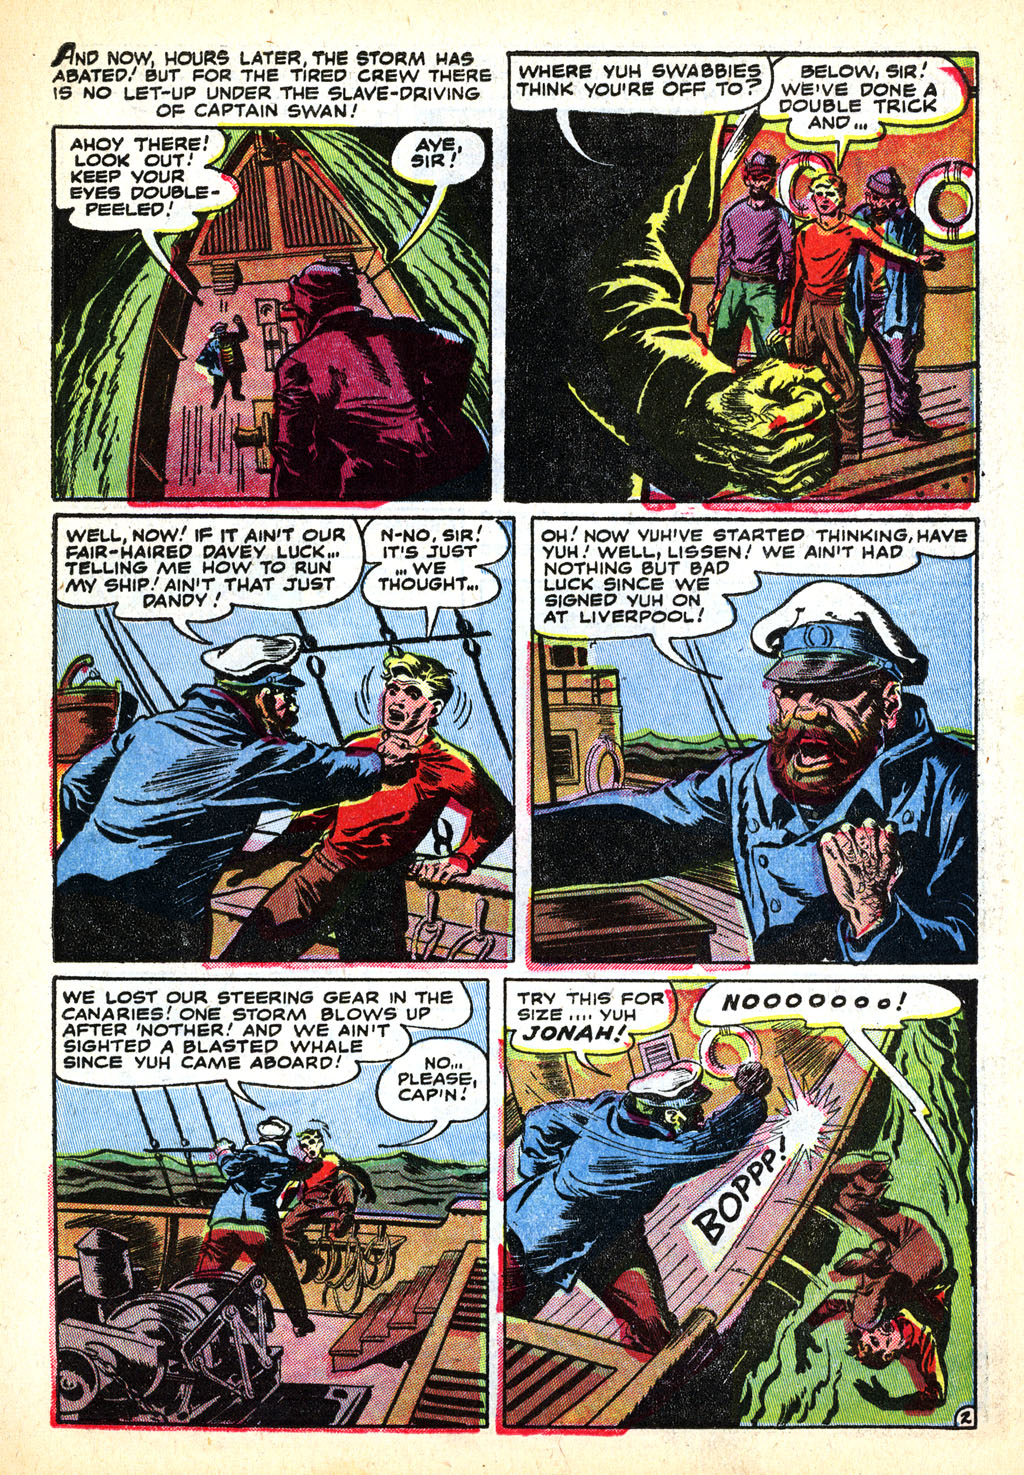 Marvel Tales (1949) 112 Page 12